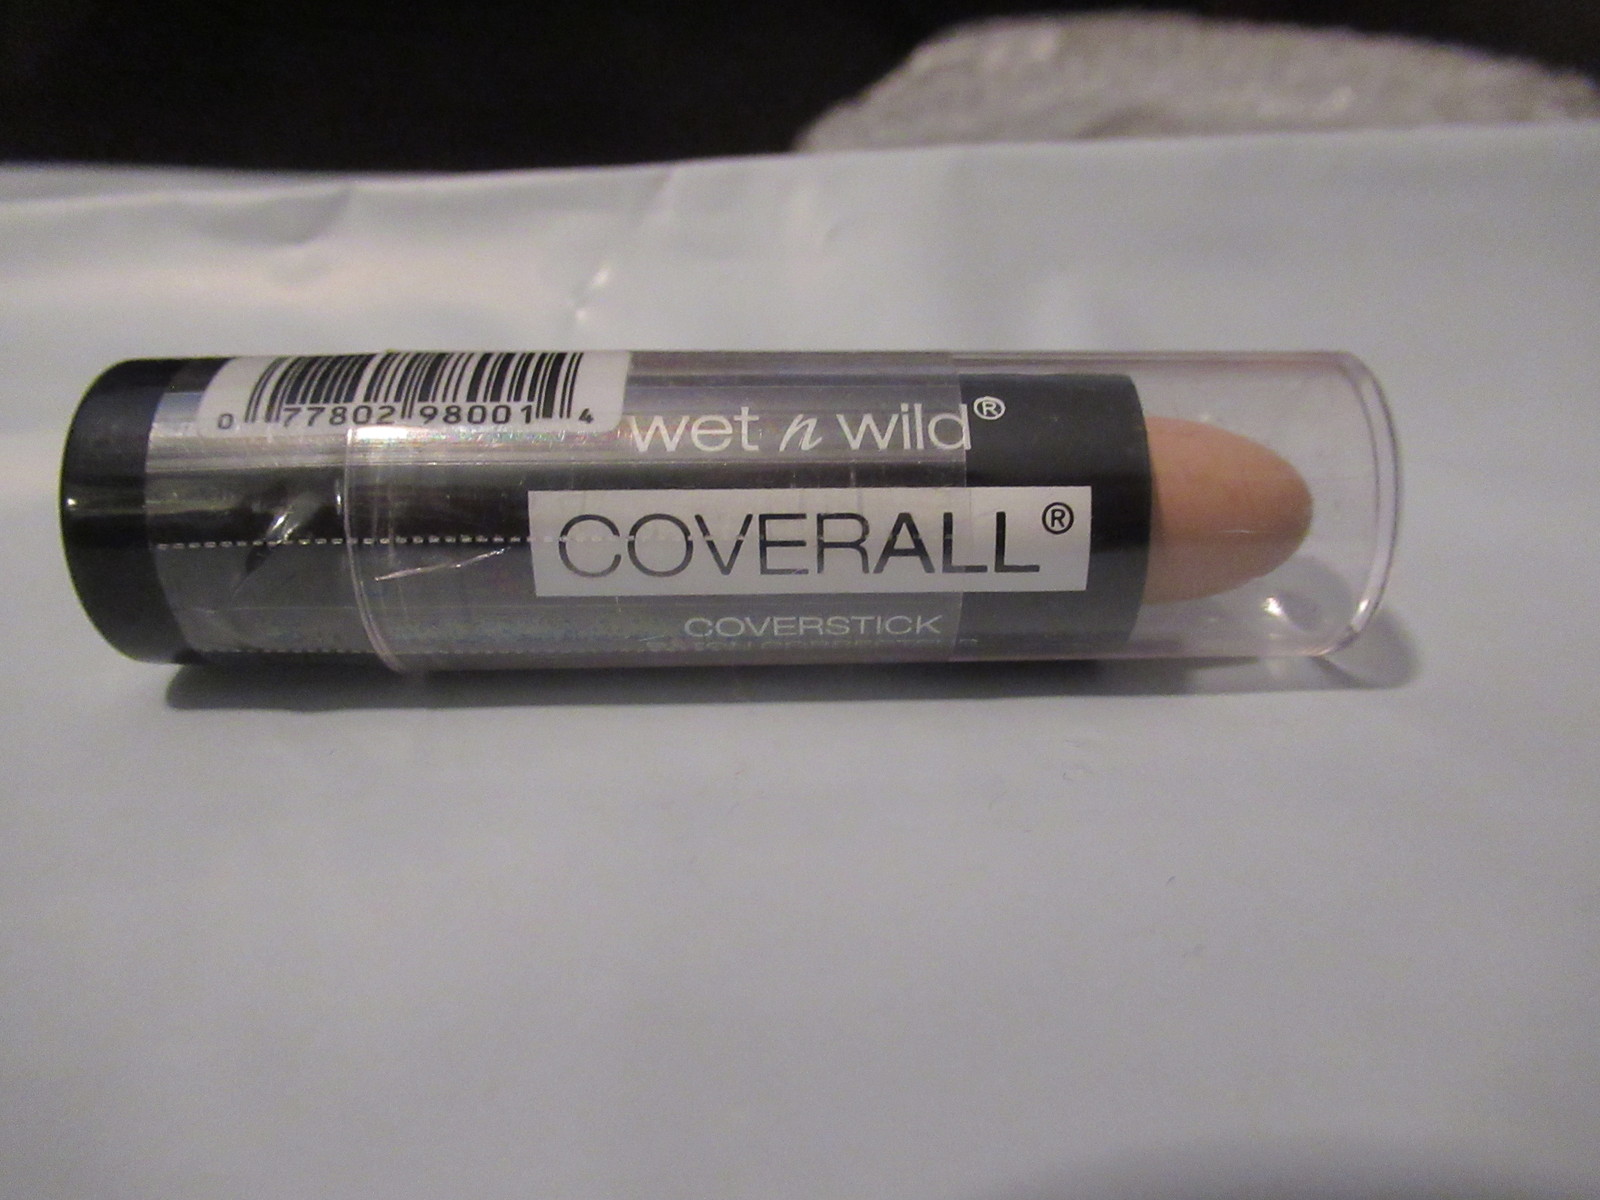 Primary image for Wet n Wild Coverall Coverstick 804 Light/Medium Sealed